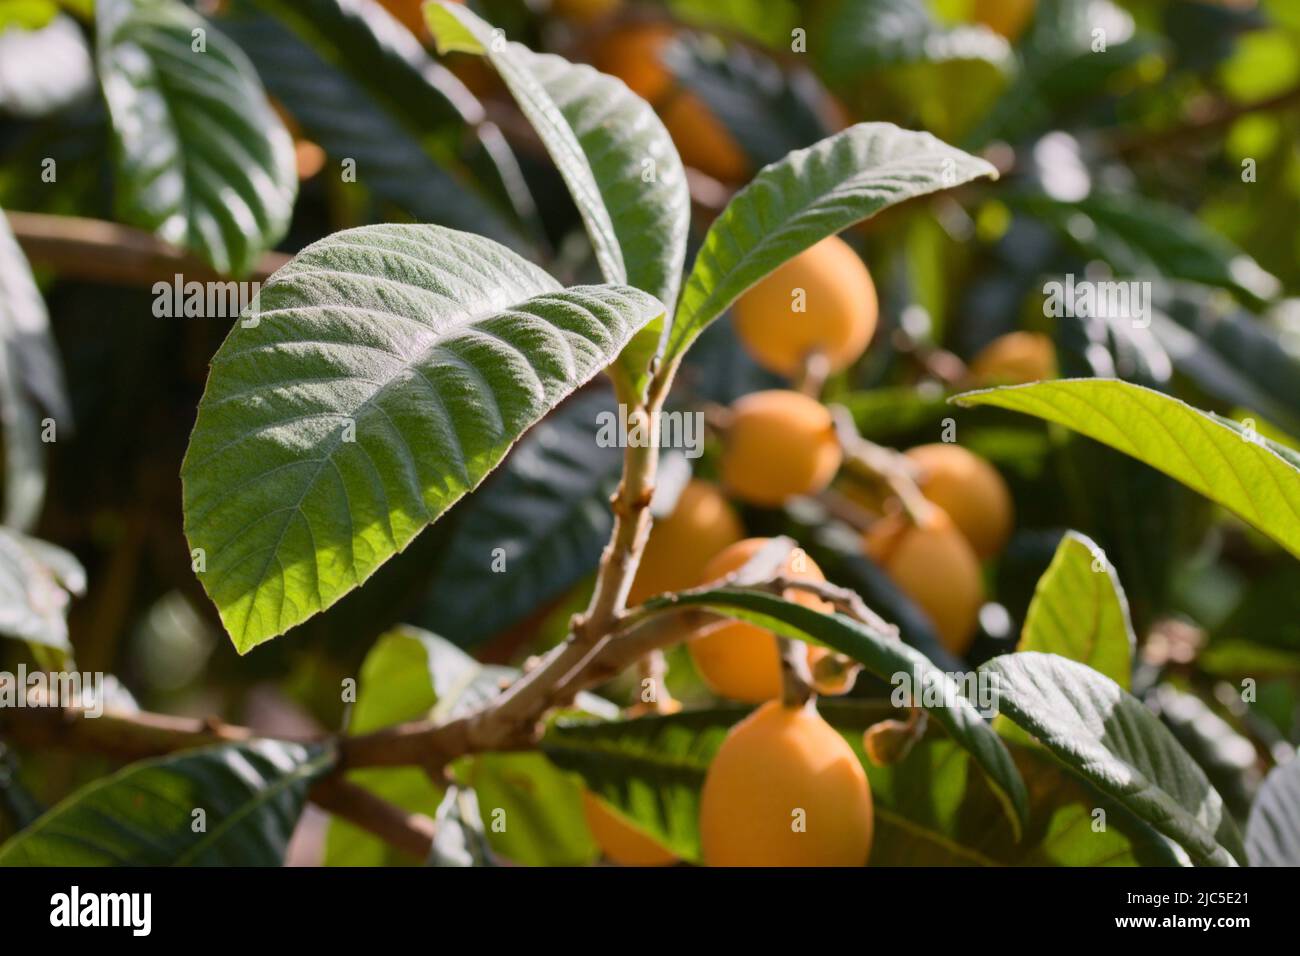 Close-up of the leaves of a medlar tree that has ripe fruit lit by the sun in the background Stock Photo